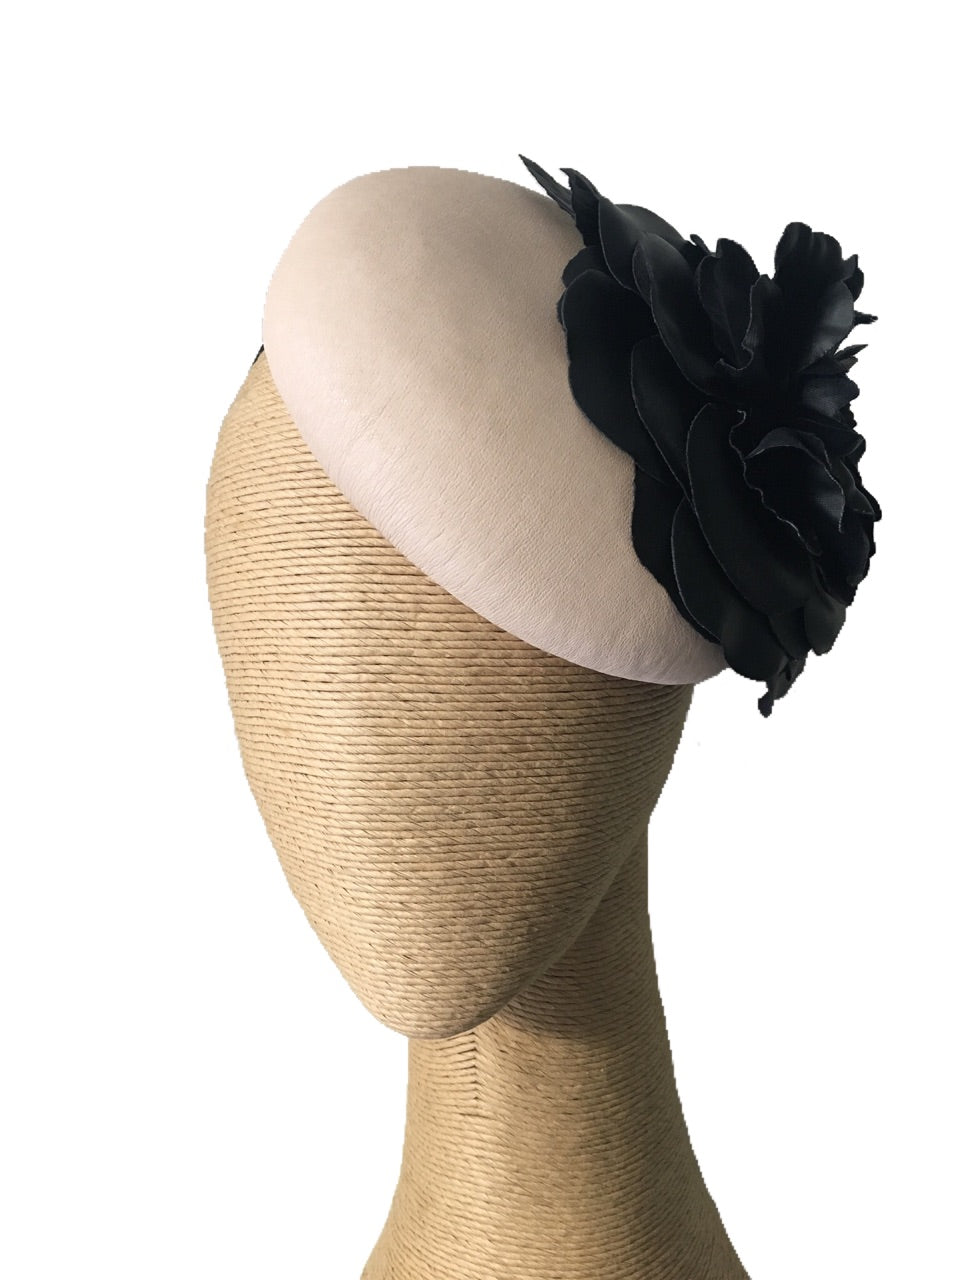 Max Alexander Button Leather Hat in Beige with Black Flower